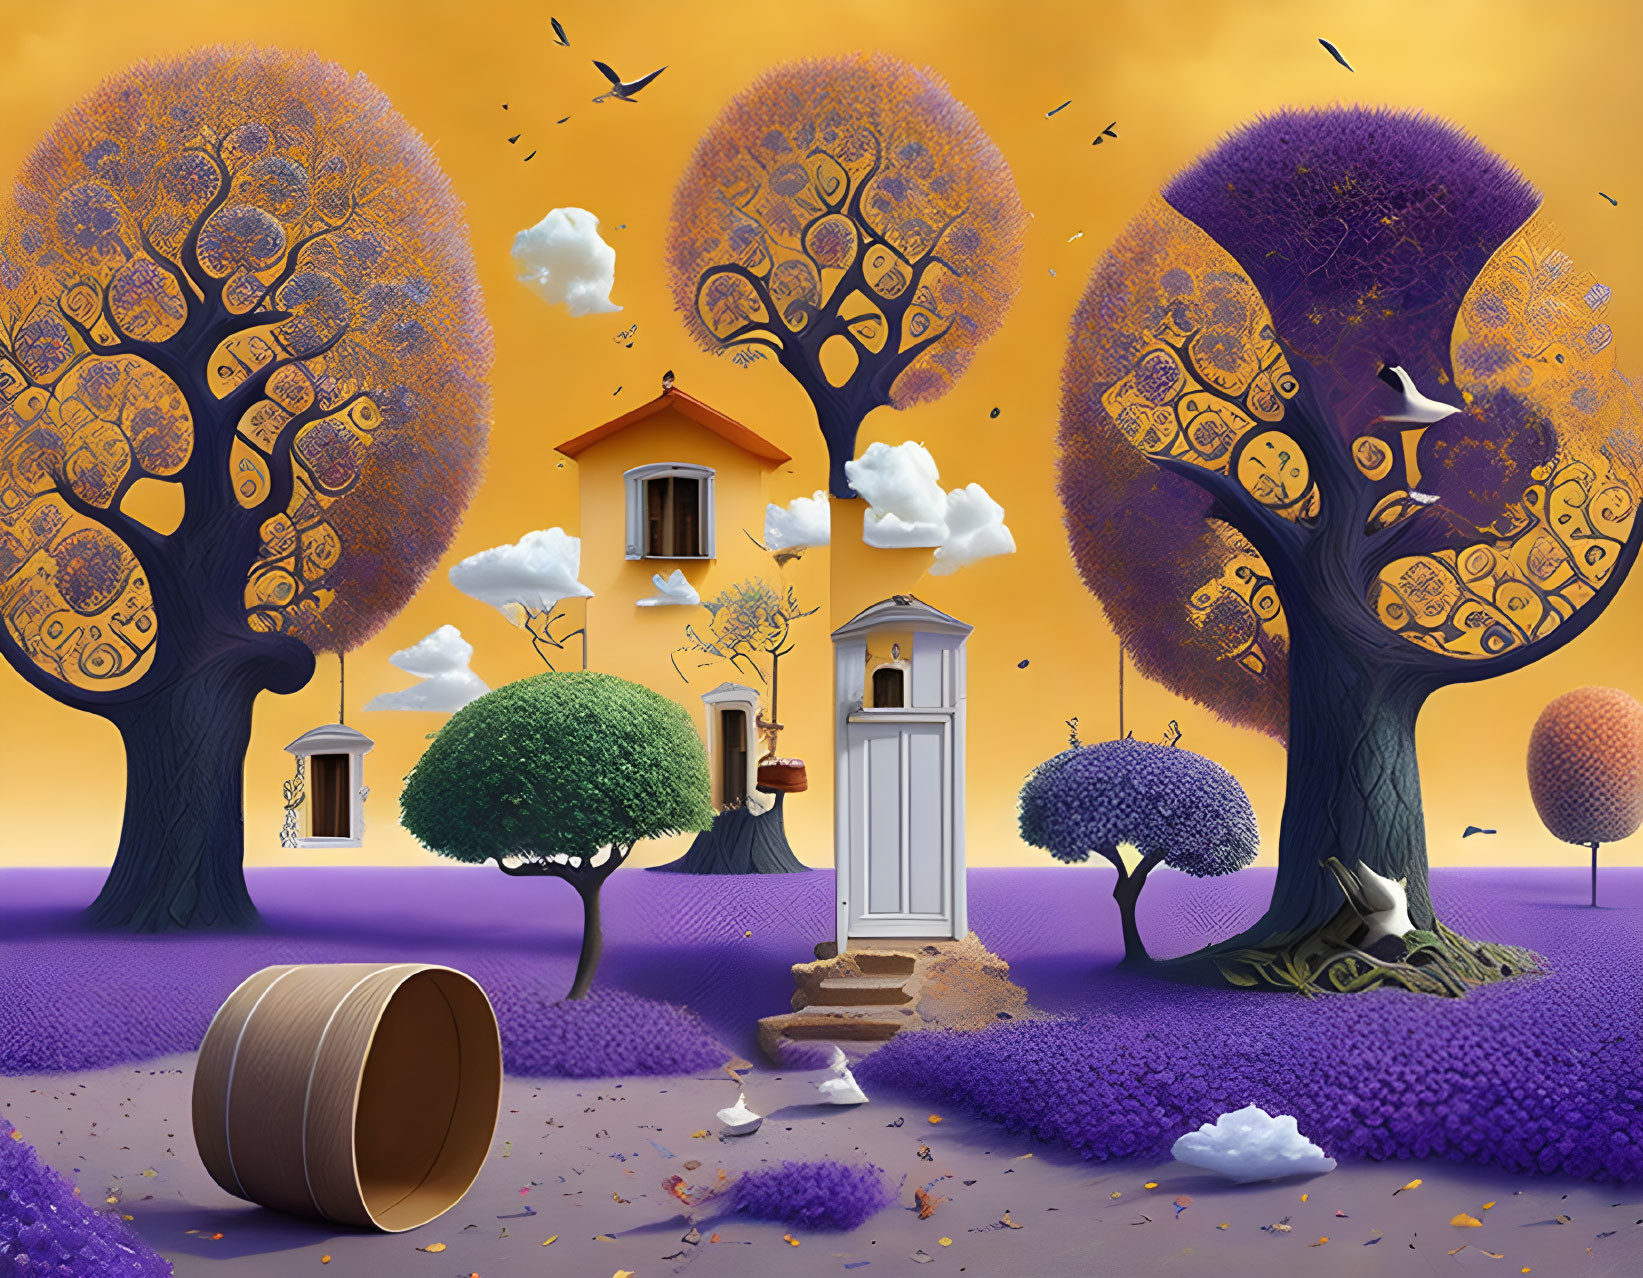 Purple Foliage and Whimsical Trees in Surreal Landscape